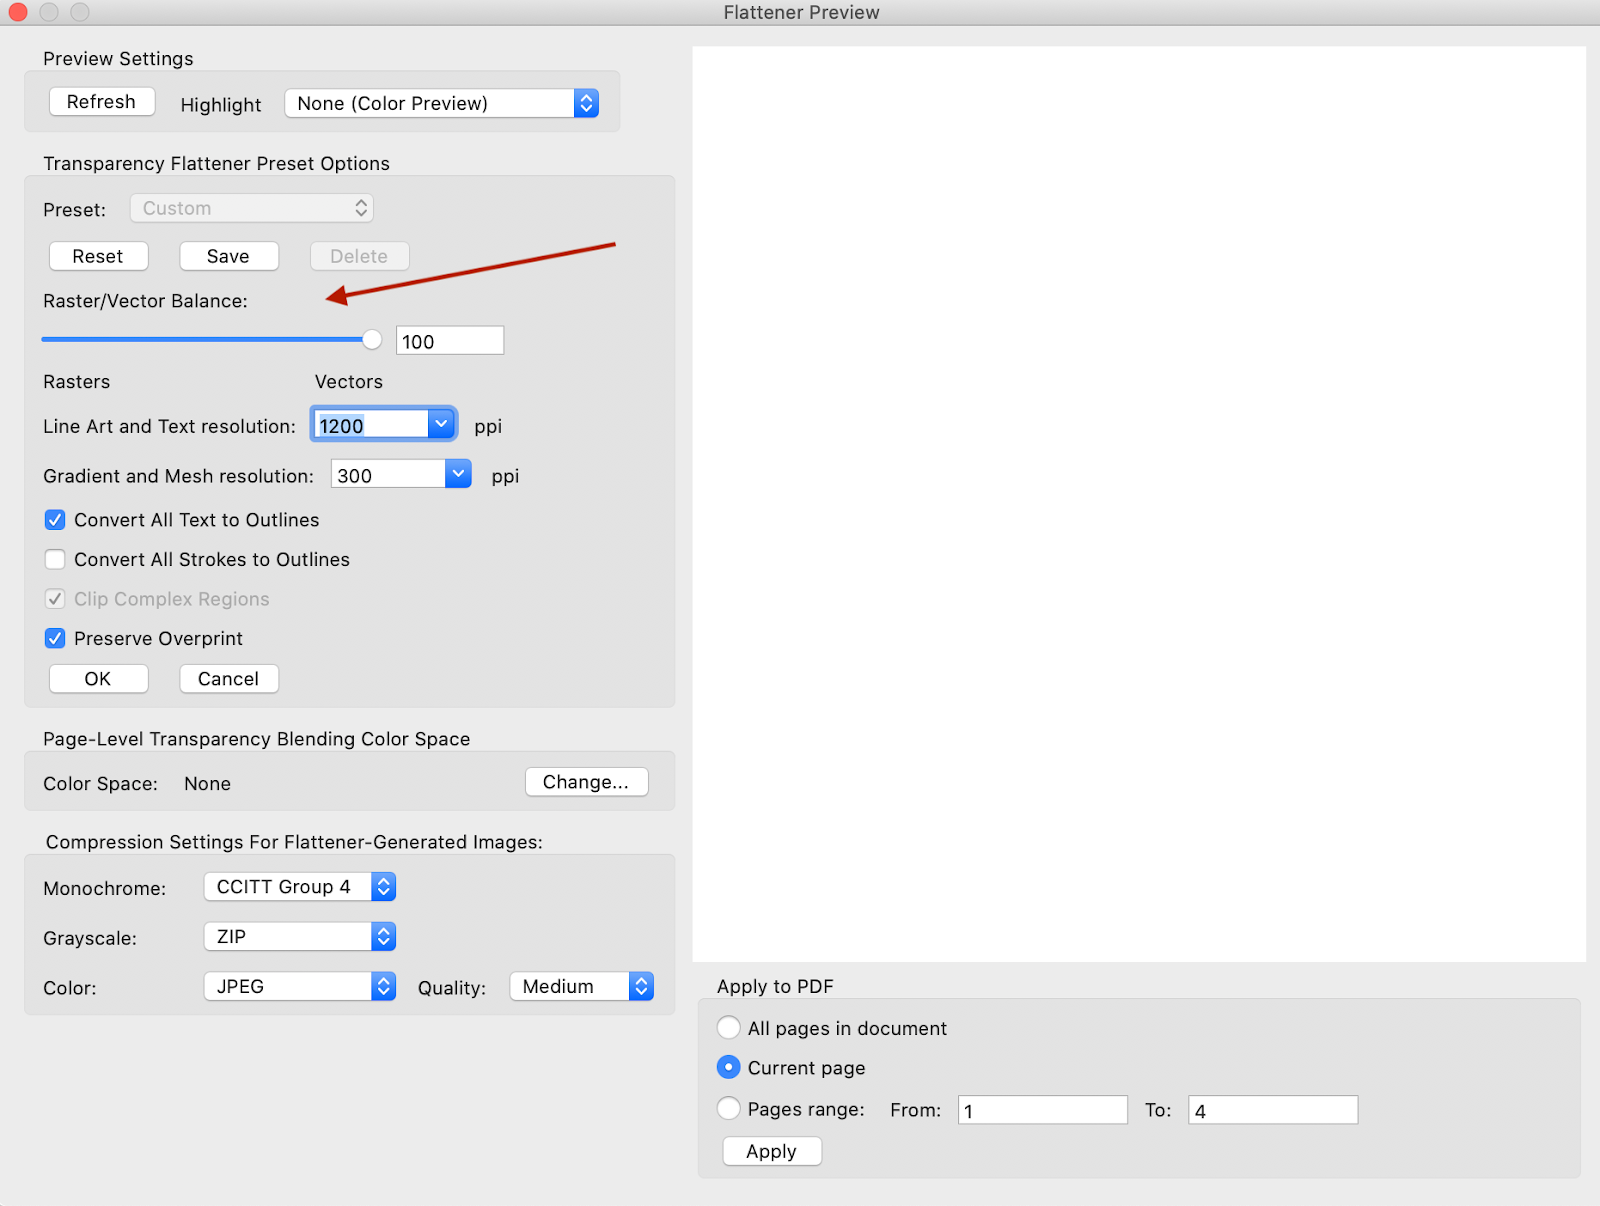 Screenshot of the flattening preview of Adobe. Use the sliding scale for raster/vector balance.